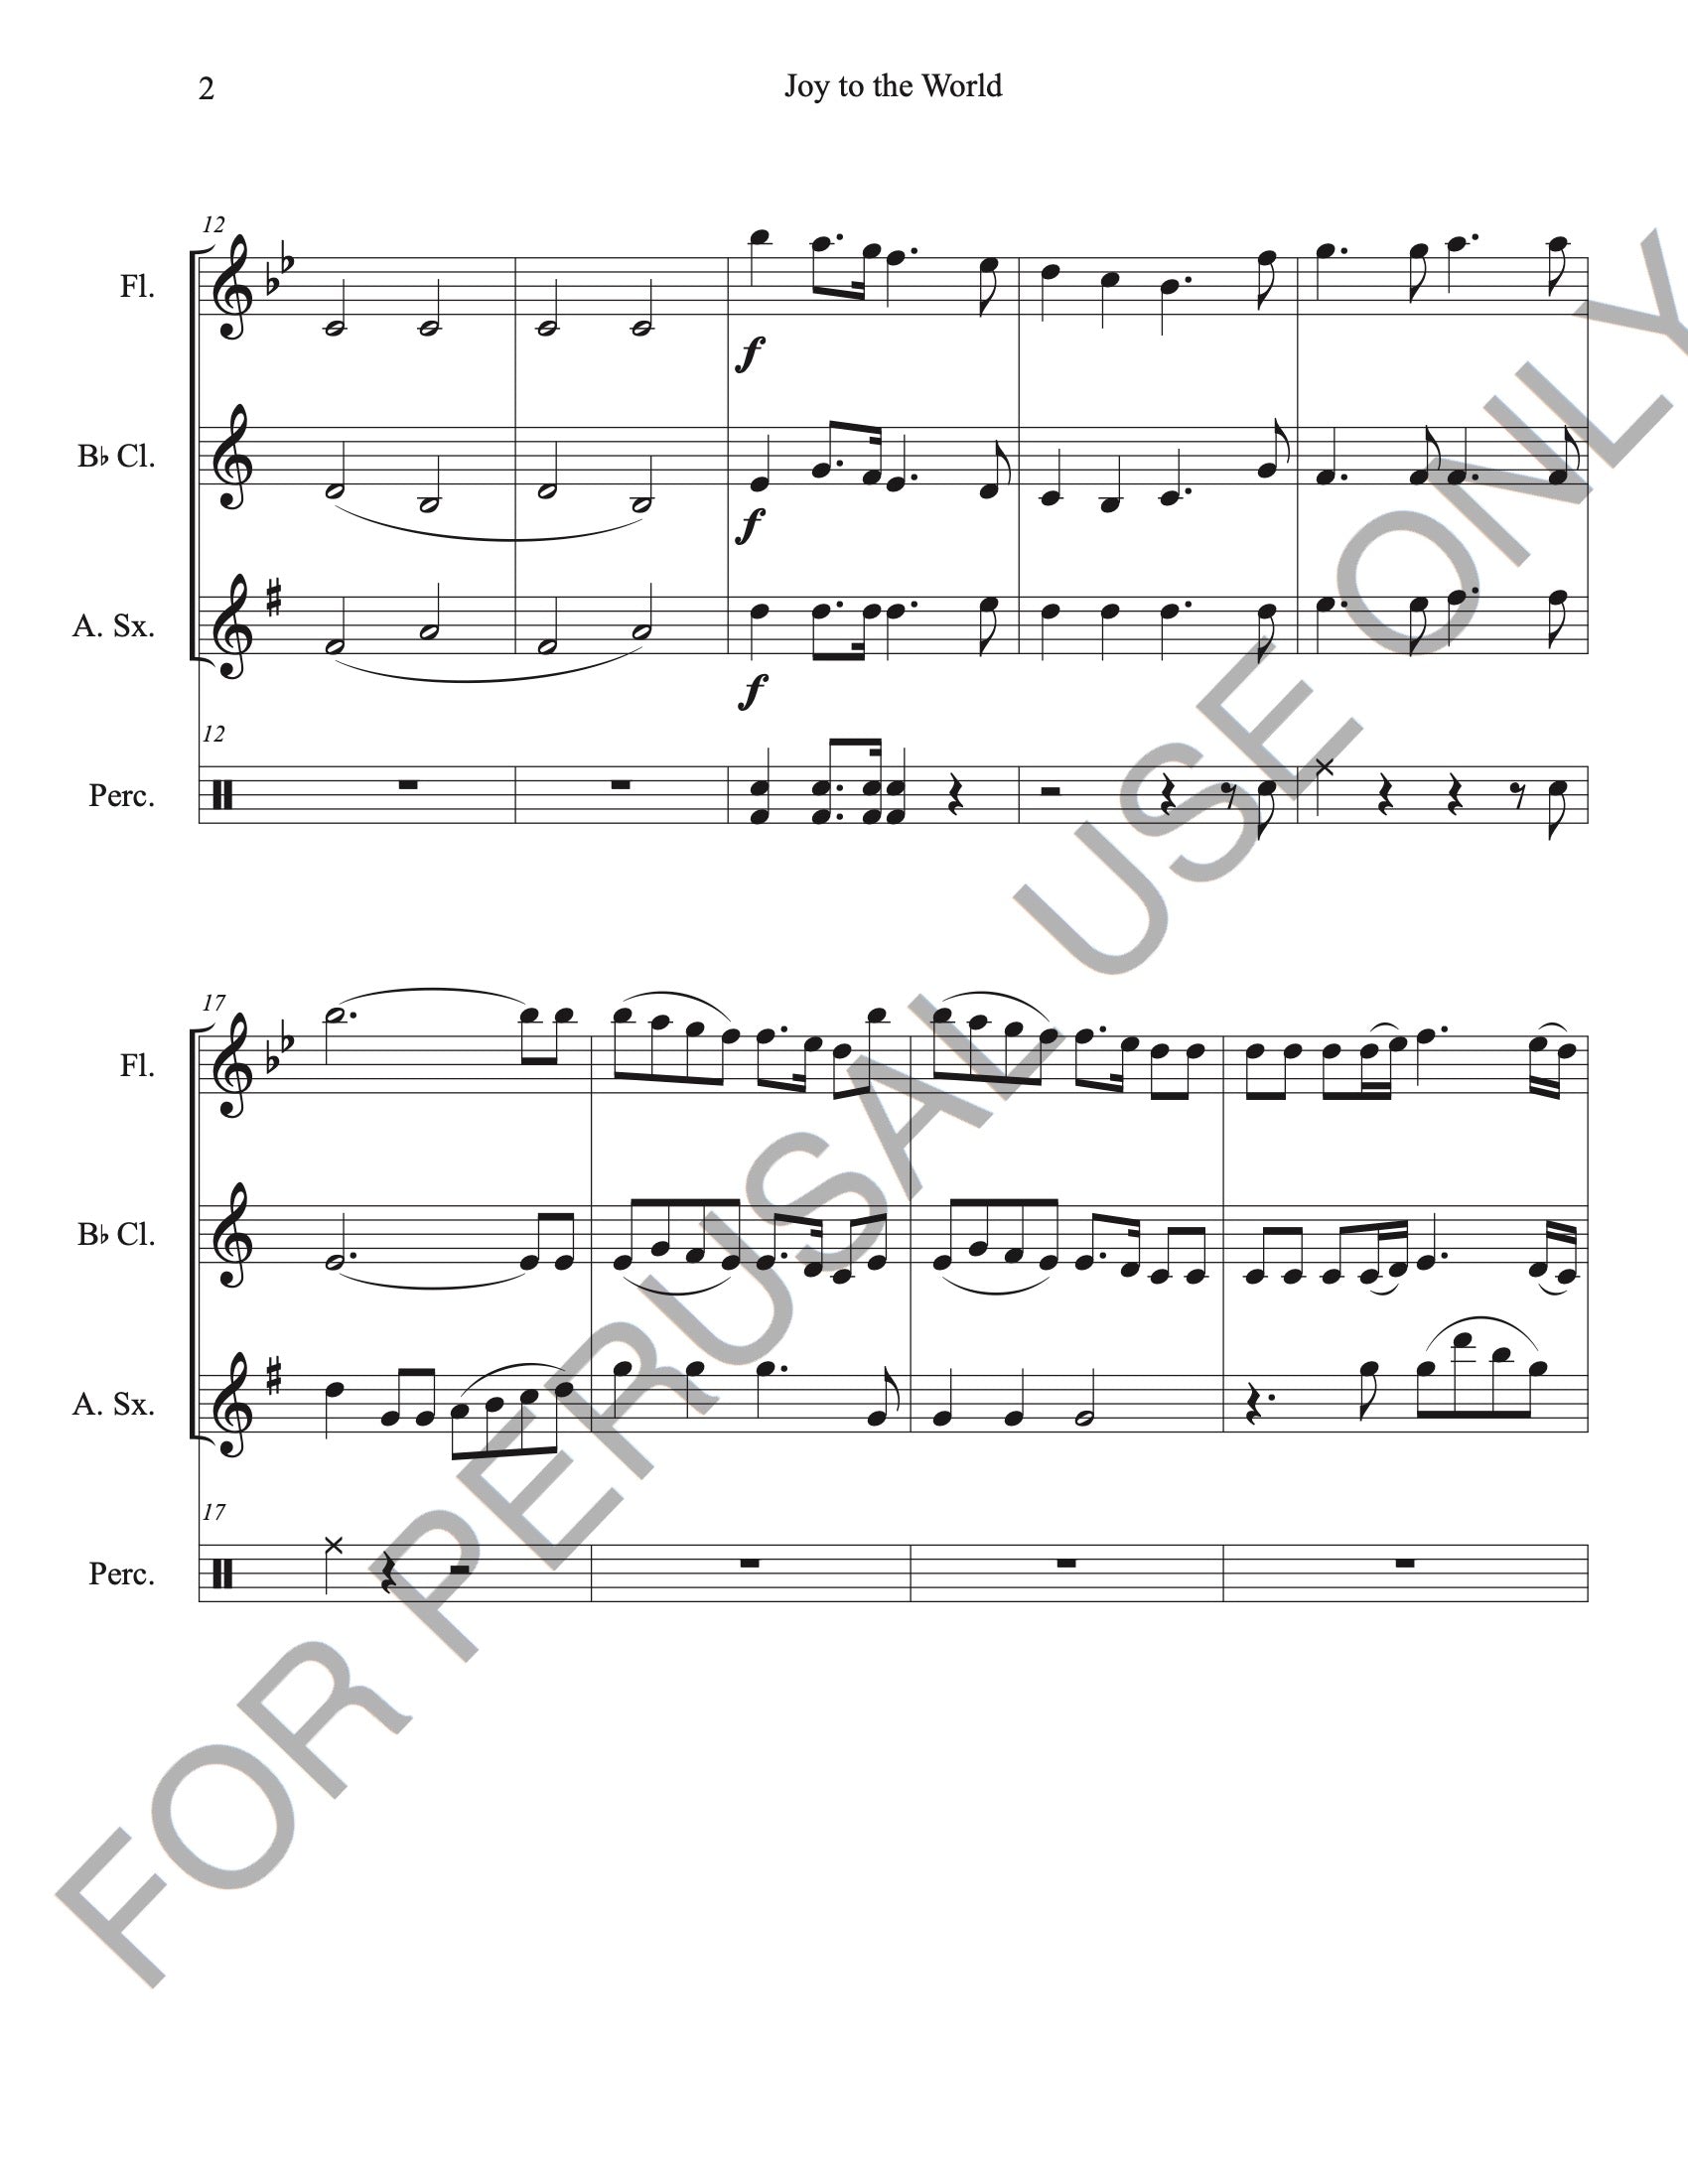 Joy to the World for Flute, Bb Clarinet, Alto Sax and Percussion (Score and Parts)